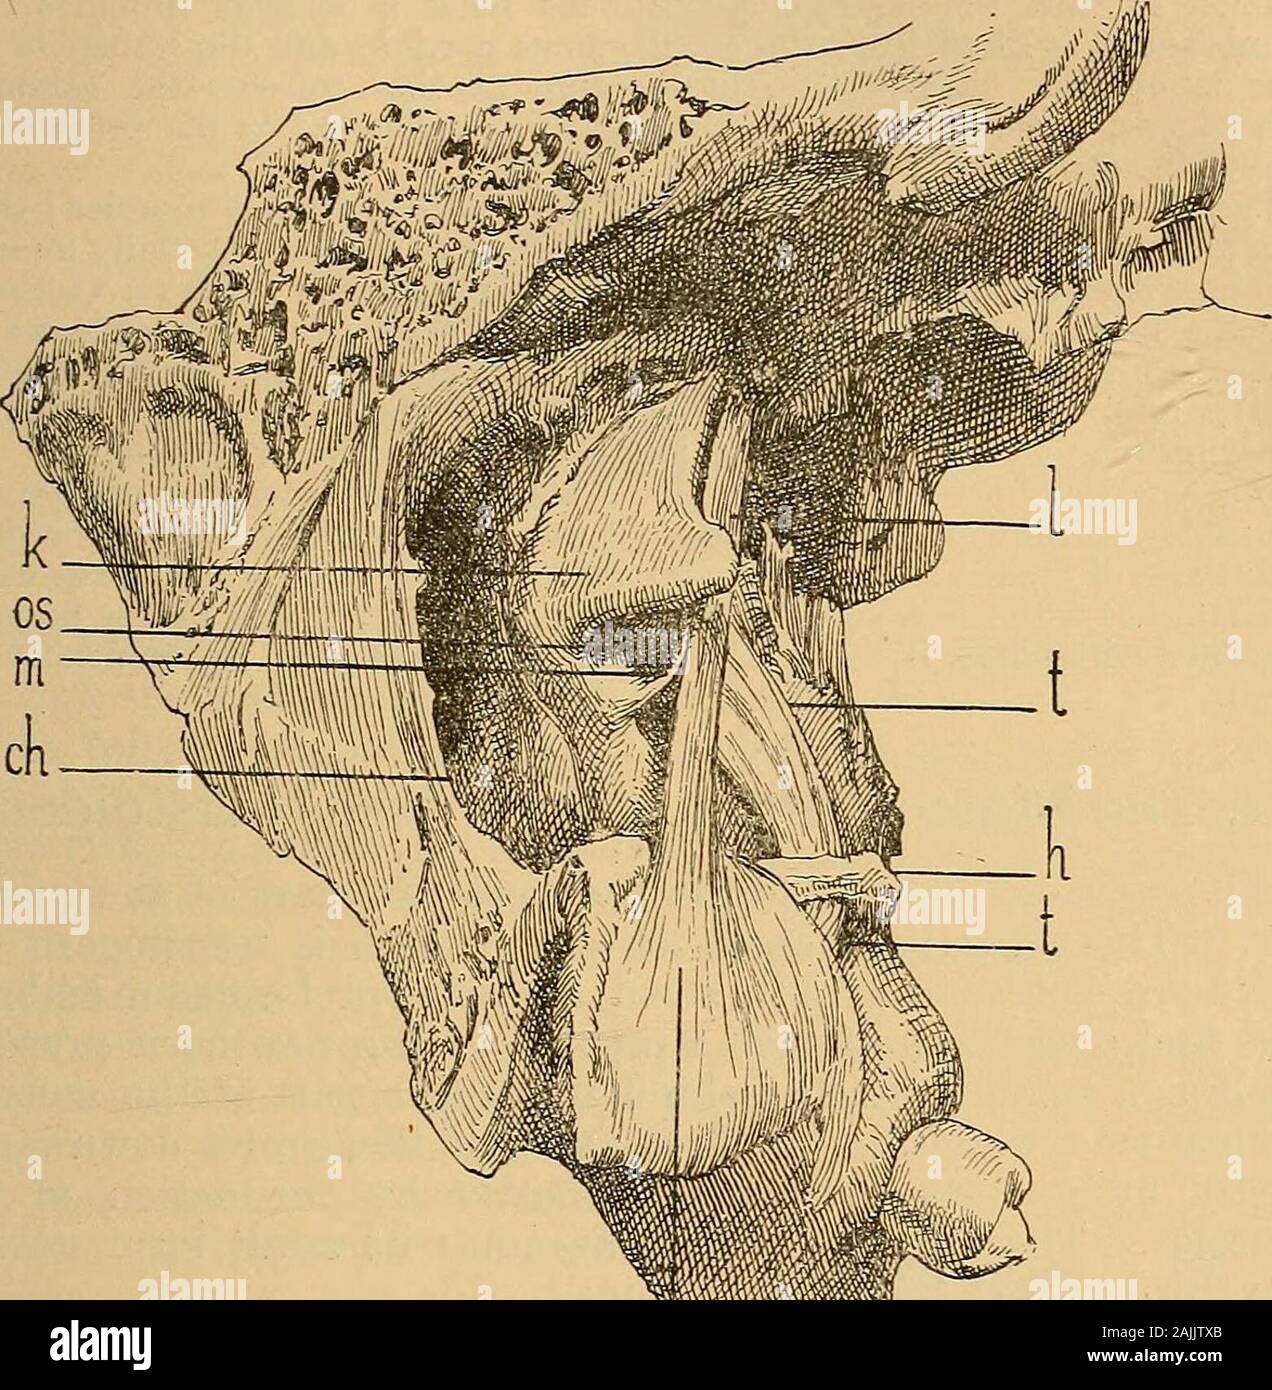 A text-book of the diseases of the ear for students and practitioners . uced by the levator andtensor palati muscles, which extend from the Eustachian tube to the softpalate. The levator veli palatini (petro-salpmgo-staphylmus, Fig. 46, I) arisesfrom the inferior surface of the petrous bone bordering on the carotid canal.Its rounded belly runs parallel to the Eustachian tube, is closely applied * Compare v. Troltsch, Arch. f. Ohrenheilk., vol. ii., and Moos, Arch,f. Augen. und Ohrenheilk., vol. i. THE MUSCLES OF THE EUSTACHIAN TUBE 45 to the membranous. portion (Fig. 46, Z), which forms the fl Stock Photo